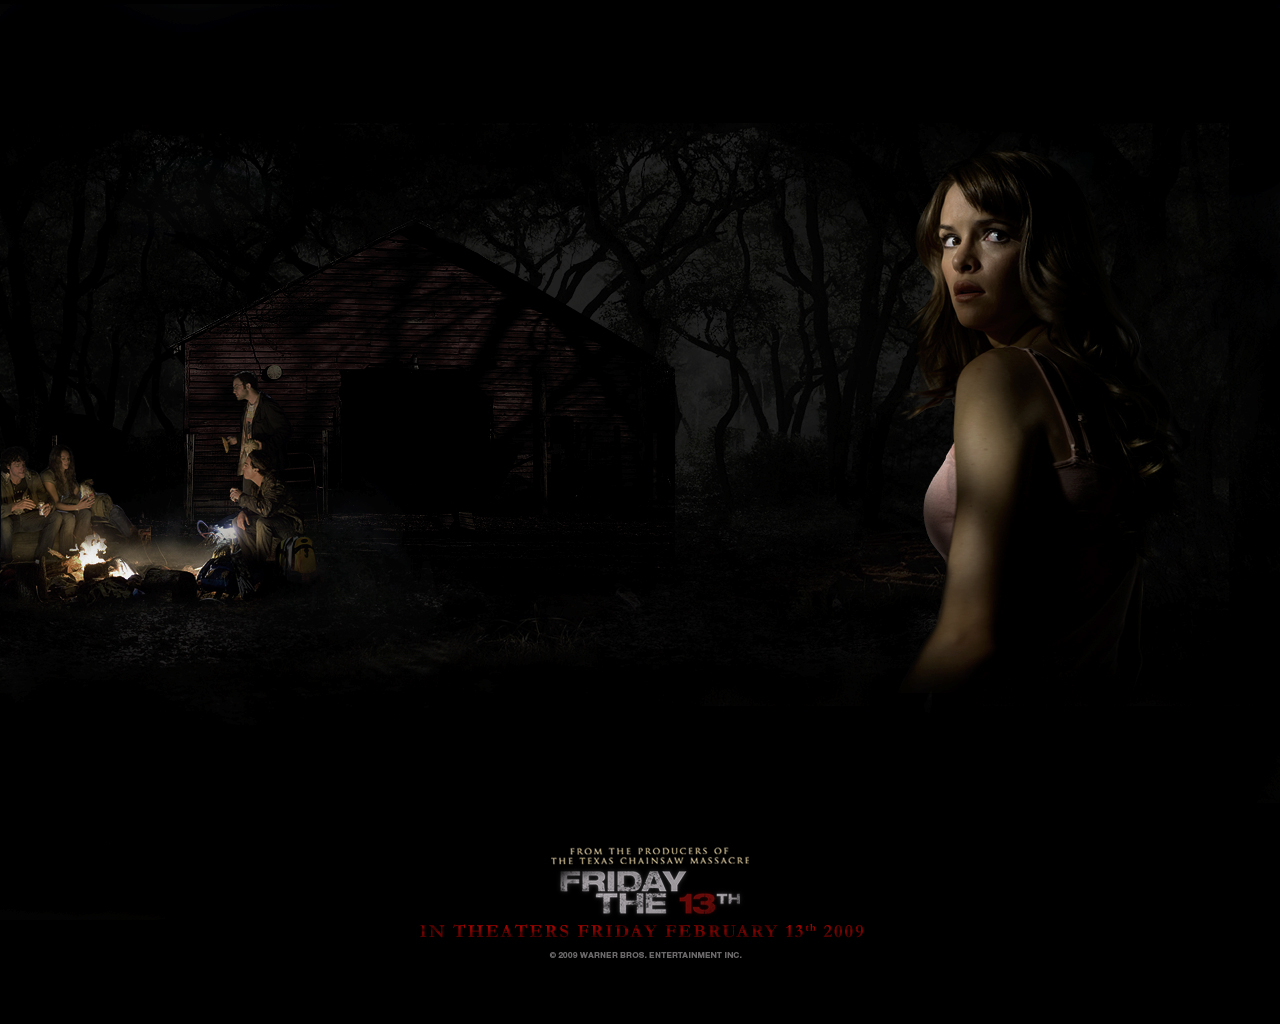 Download High quality Friday The 13th wallpaper / Movies / 1280x1024